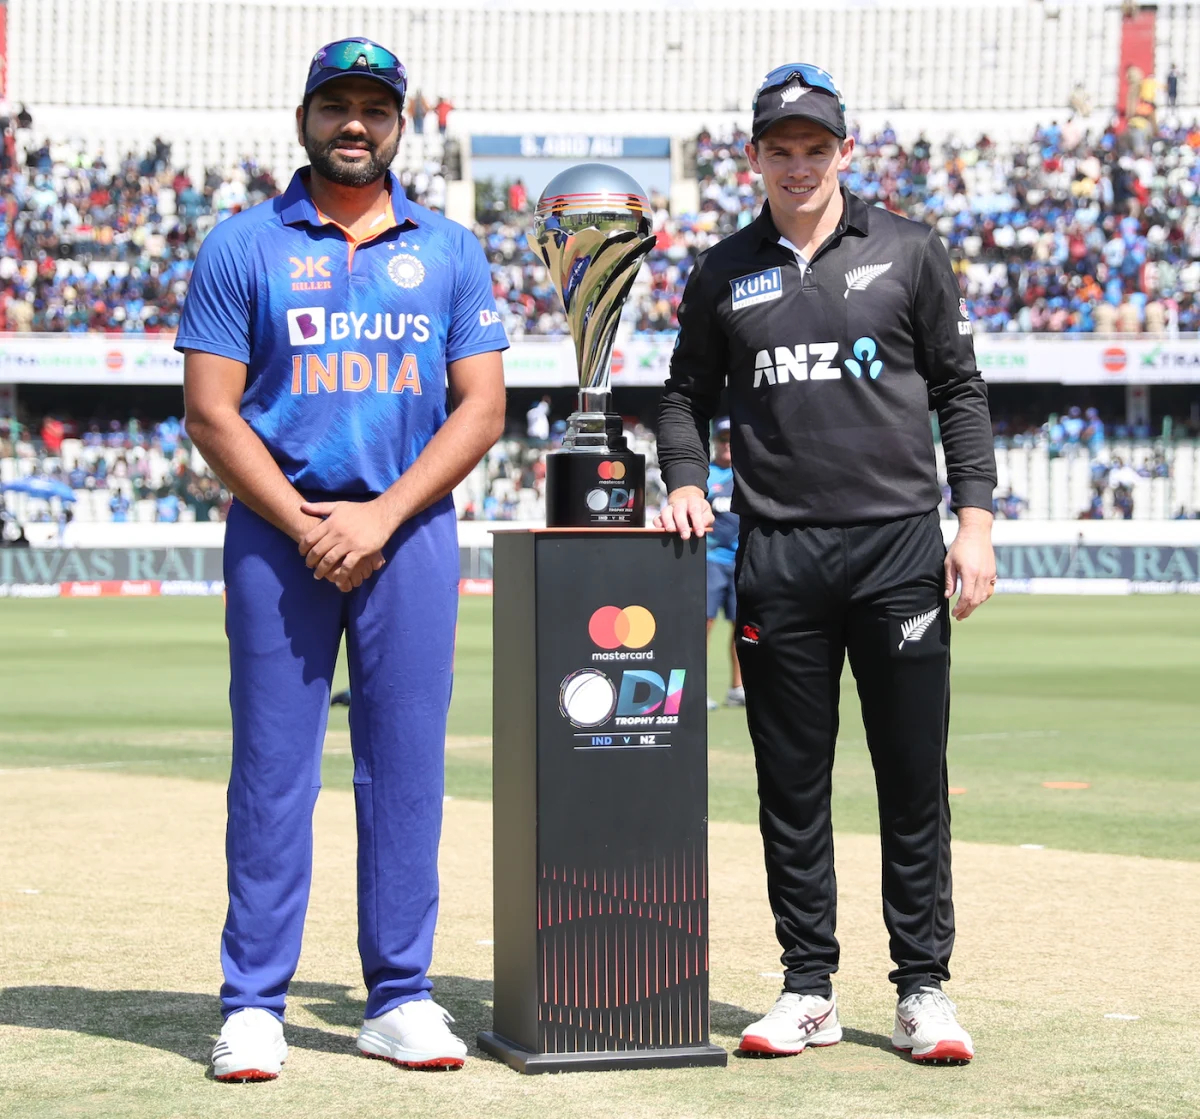 India and New Zealand will clash in third ODI in Indore on Jan 24 | BCCI